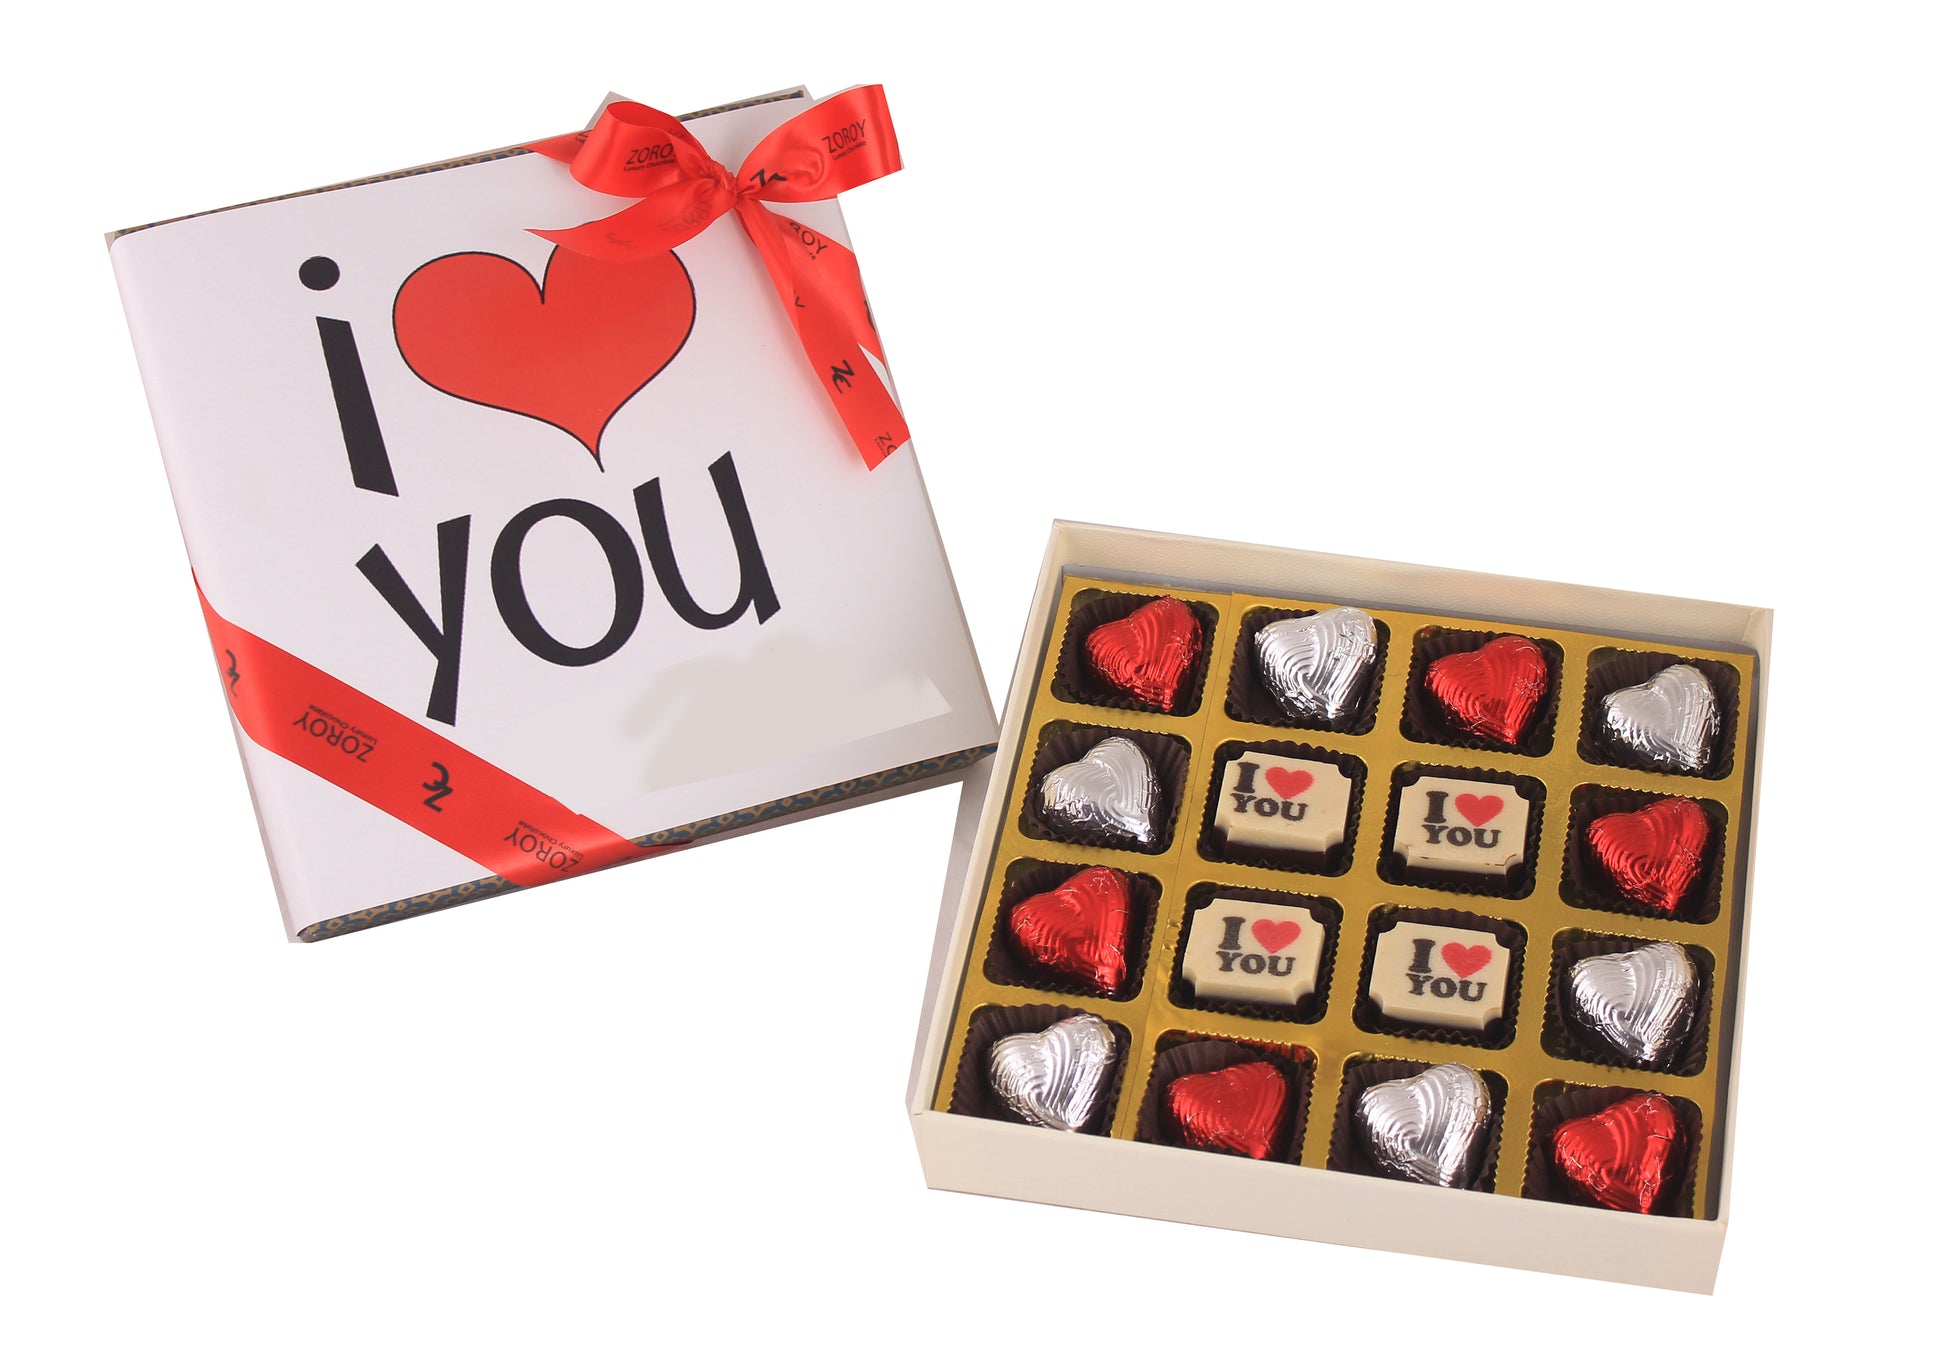 ZOROY LUXURY CHOCOLATE Valentines Day Gift Box of I love you chocolates - 170G For Girlfriend | BoyFriend Anniversary Gifts For Wife | Husband | Love Message Chocolates | Chocolate Hamper For Couples